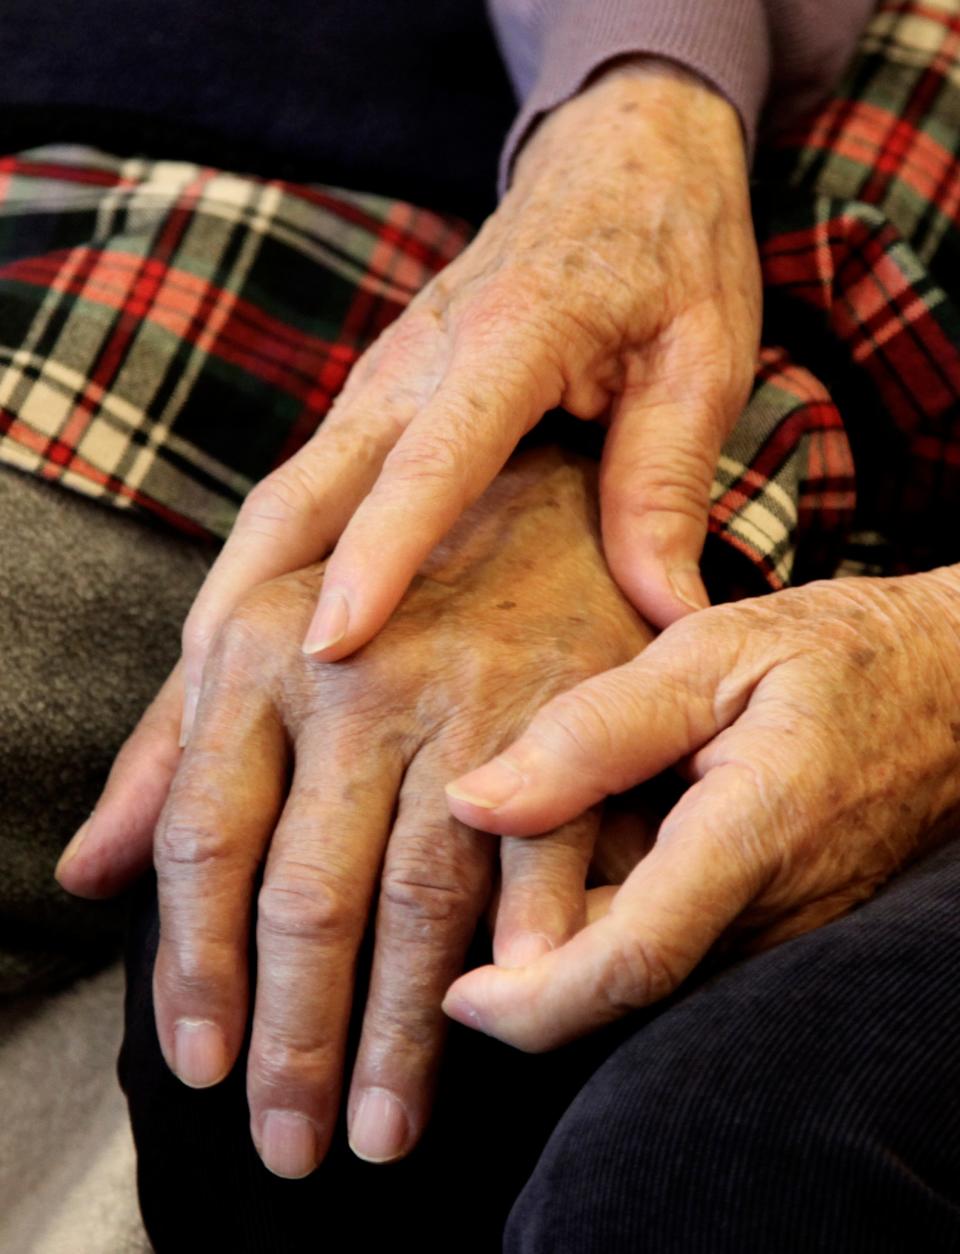 Few nursing homes would have met proposed new staffing standards, a USA Today analysis showed.